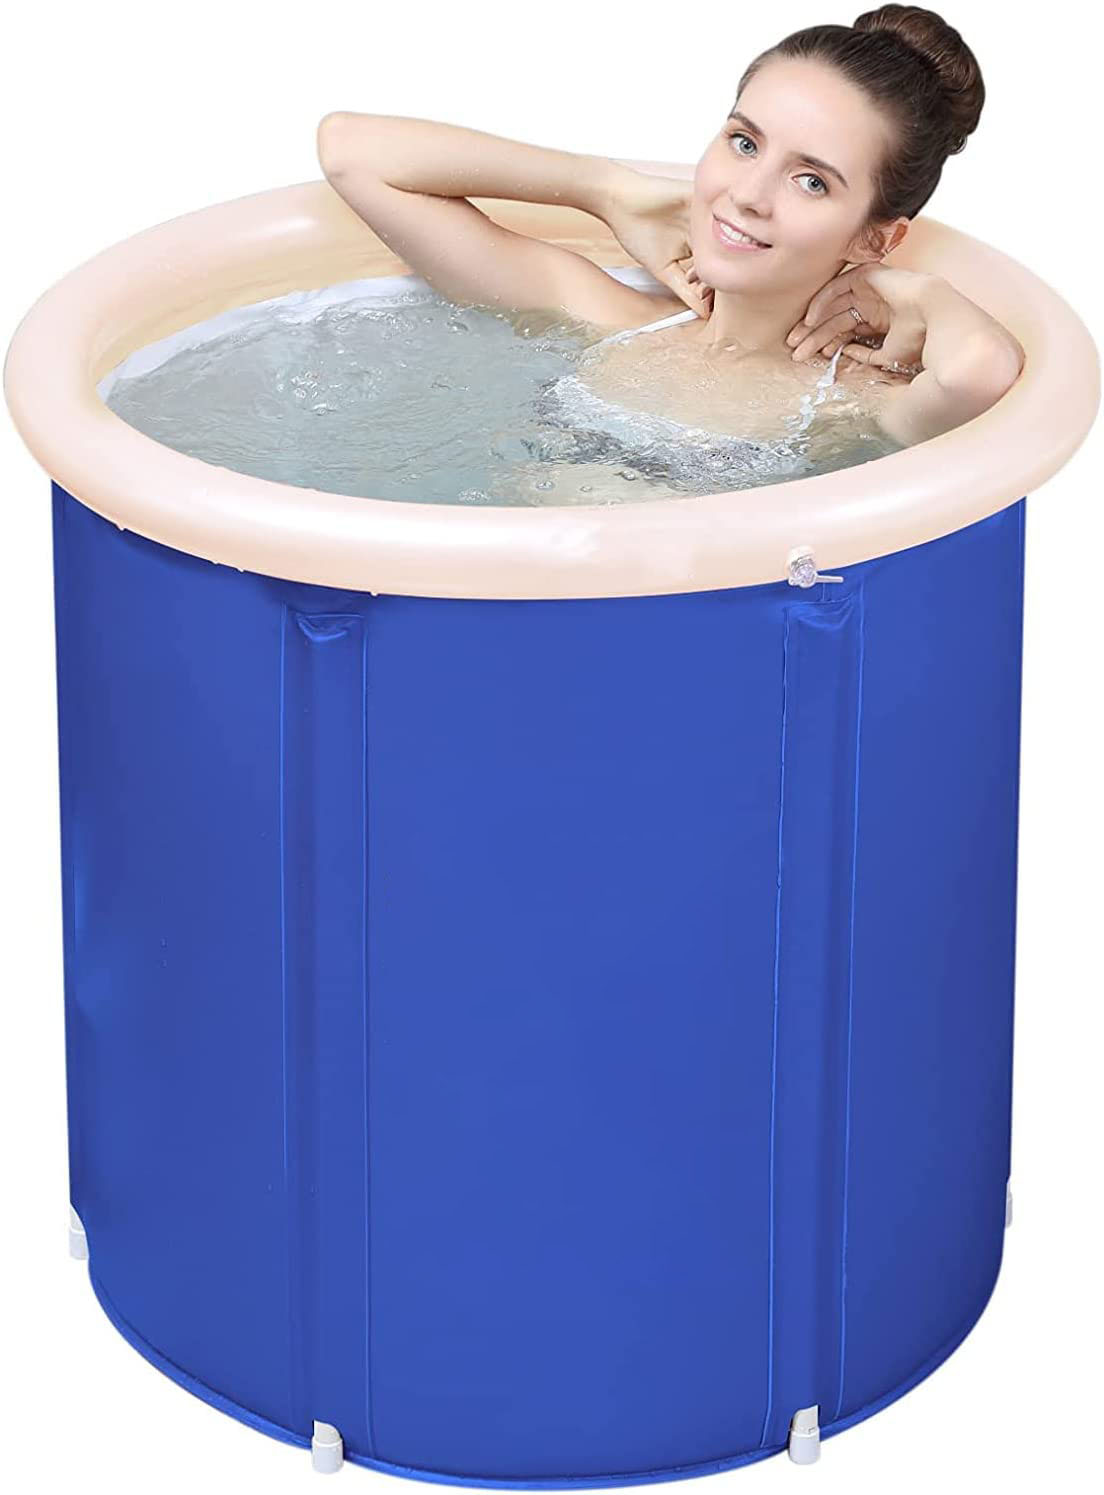 Safety Considerations for Inflatable Bathtubs